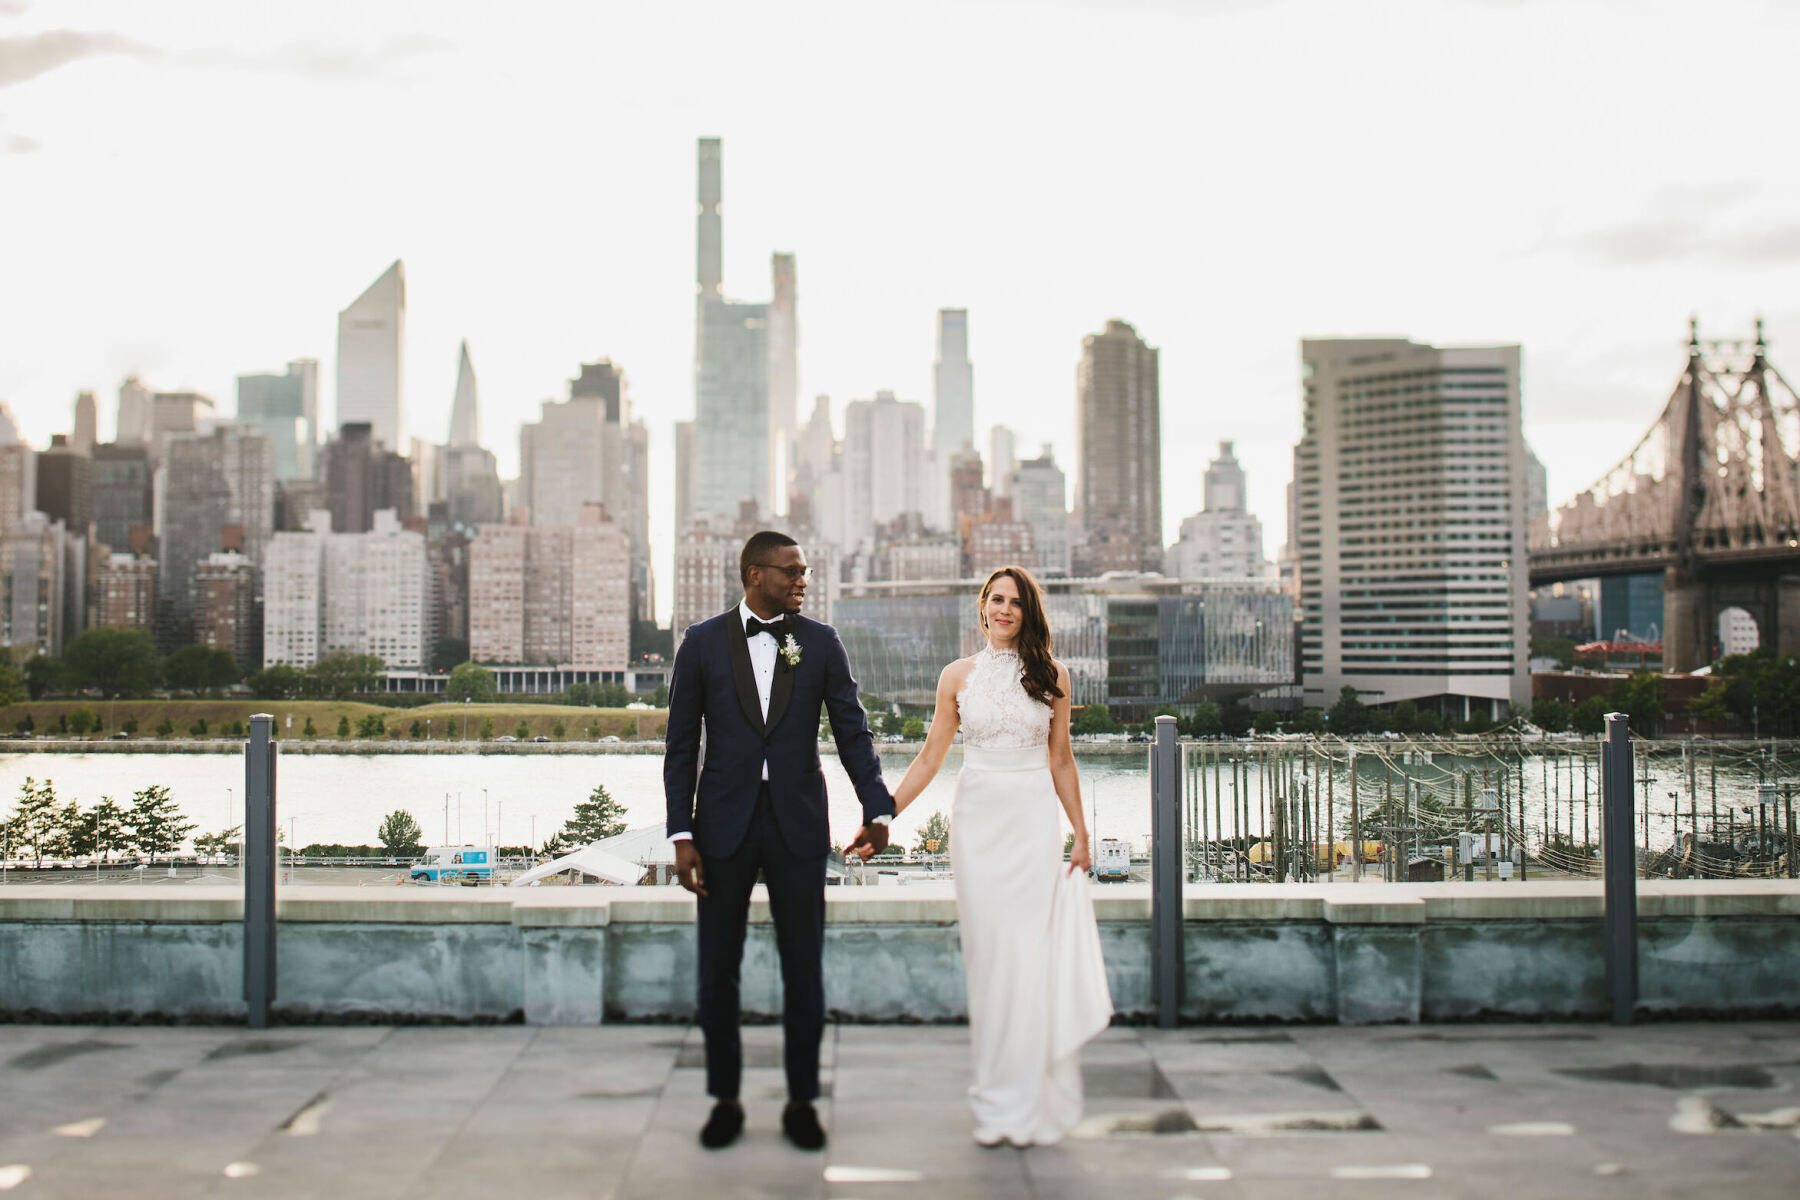 Wedding Dress Shopping: A wedding couple holding hands with a full view of Manhattan behind them.